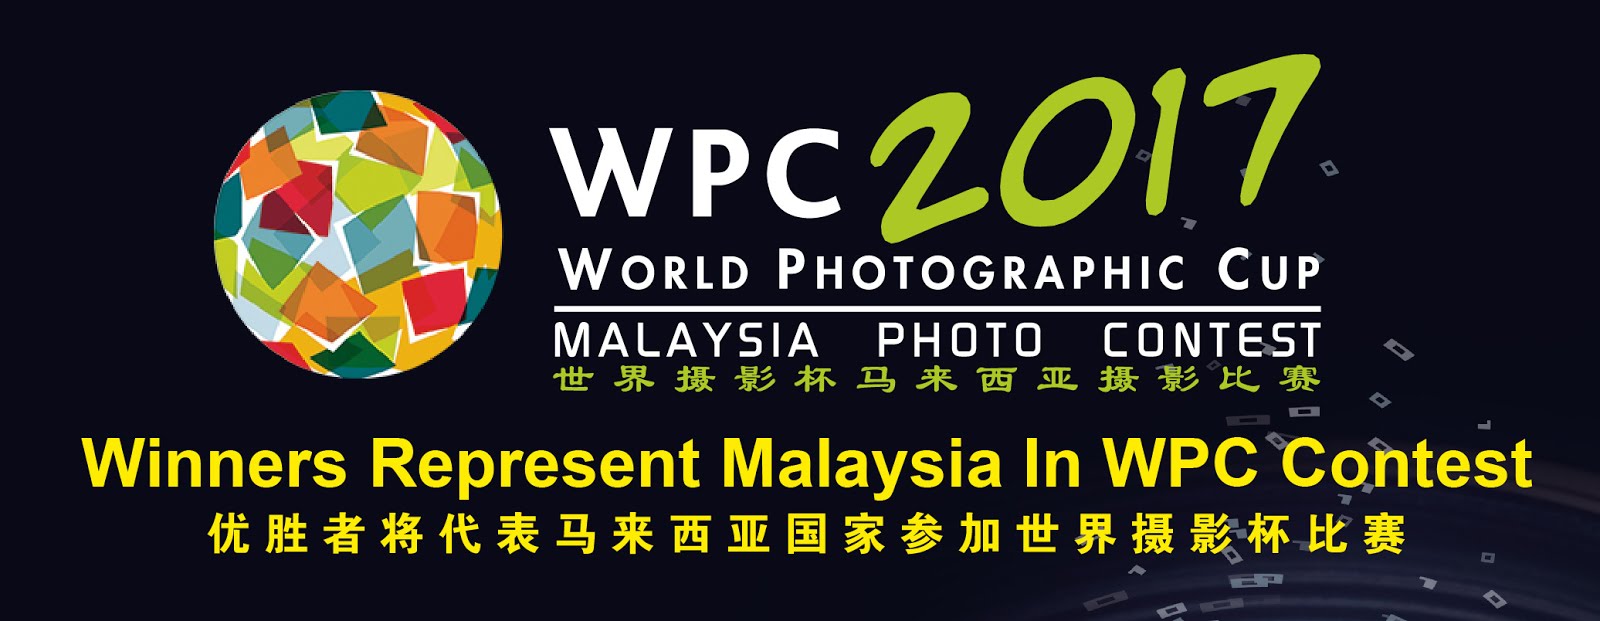 World Photographic Cup 2017